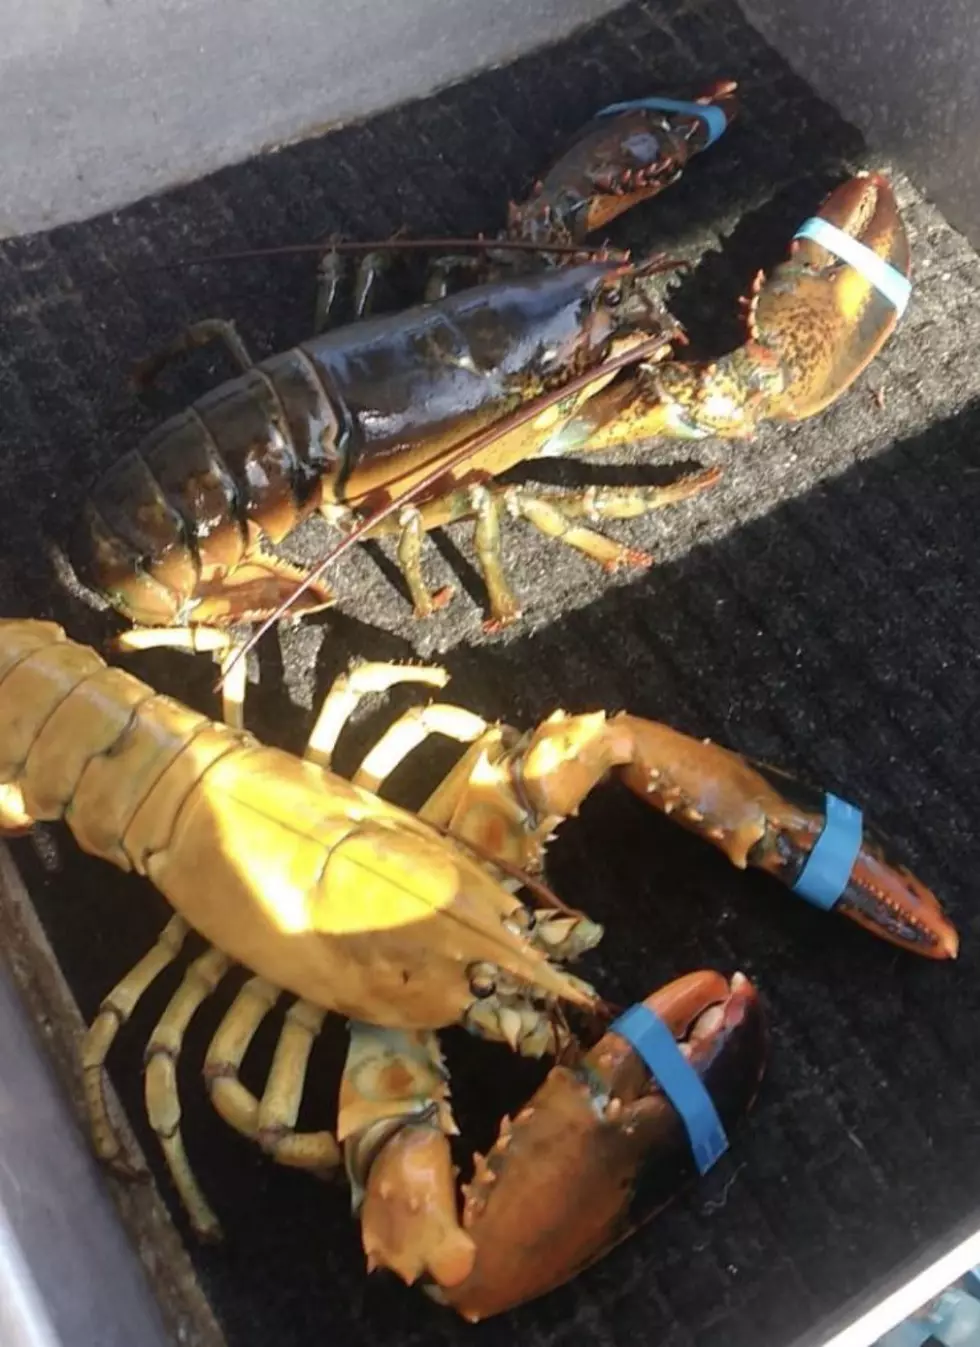 Another Yellow Lobster Landed